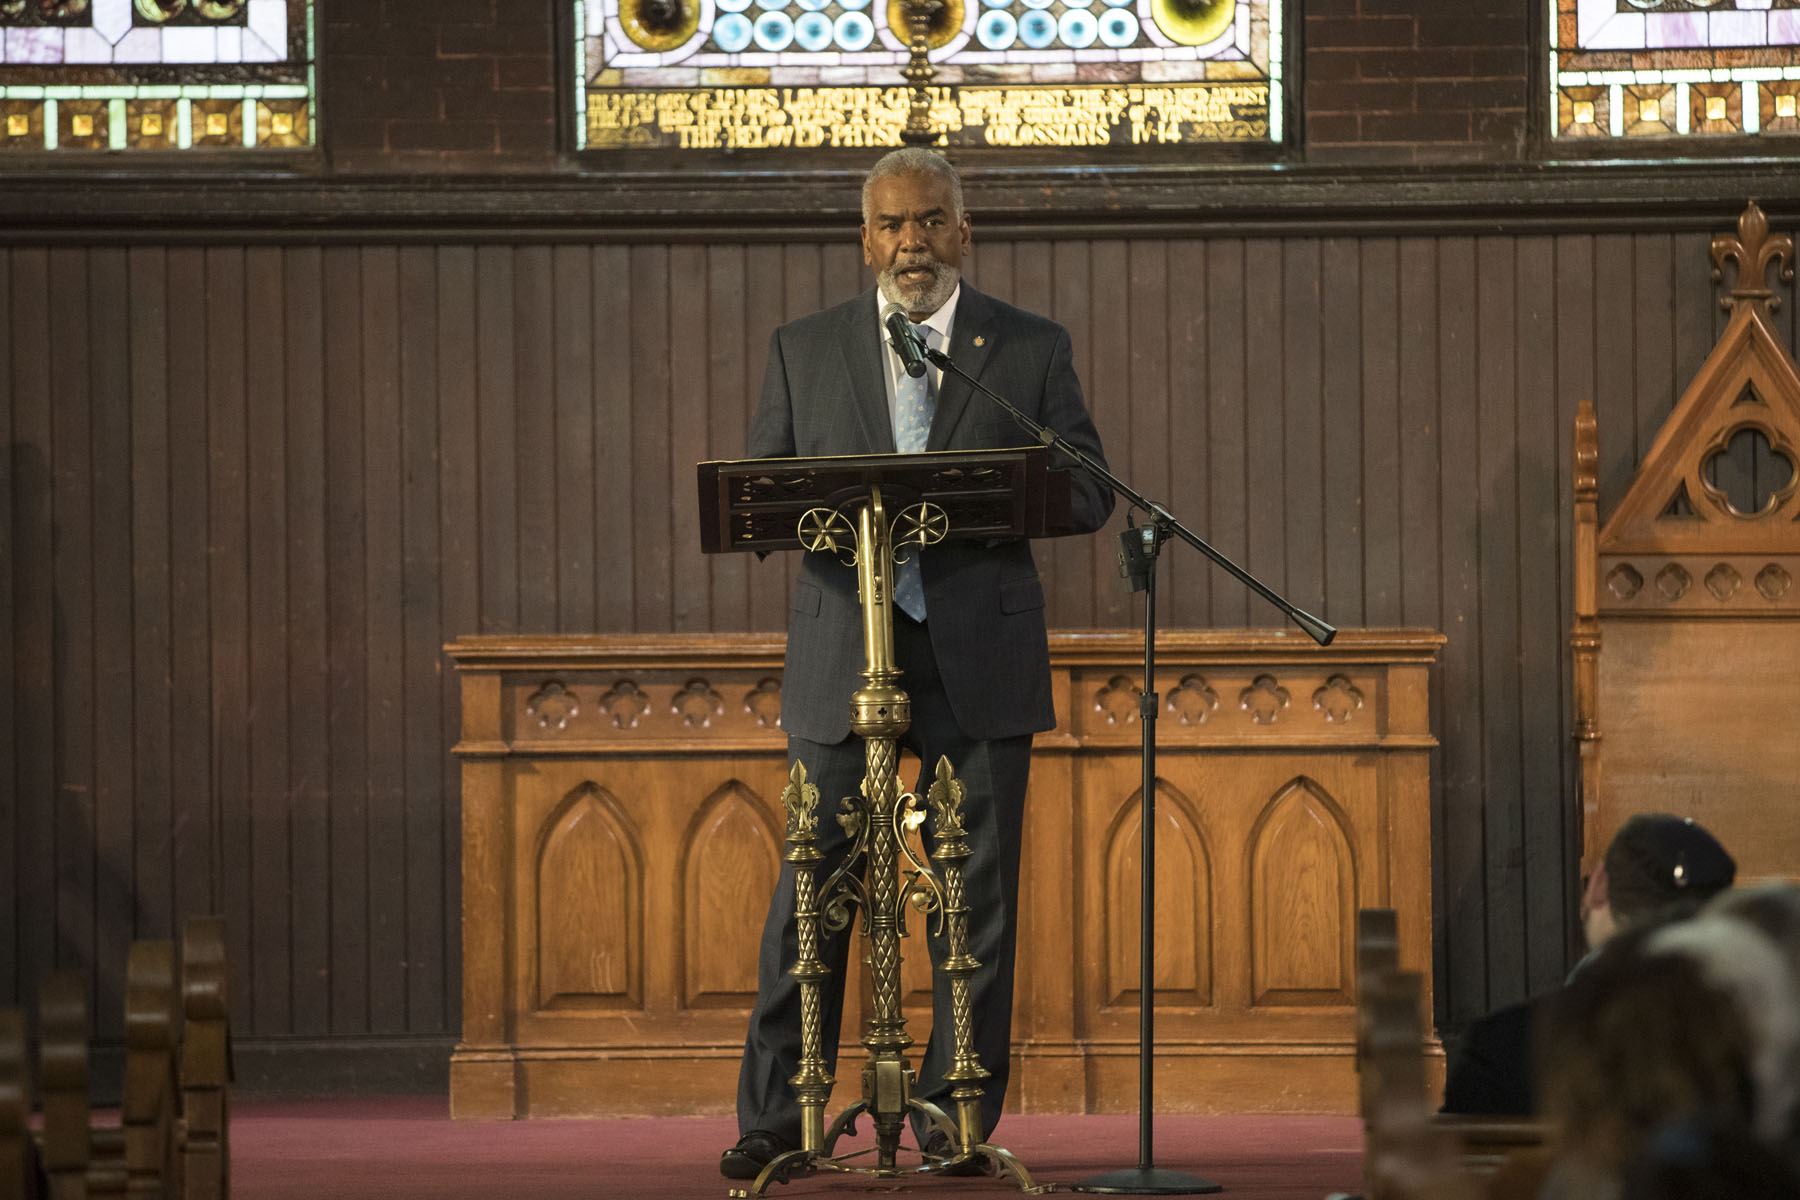 Dr. Marcus Martin, UVA’s vice president for diversity and equity, helped lead a service that included religious leaders from several faiths. (Photos by Dan Addison, University Communications) 